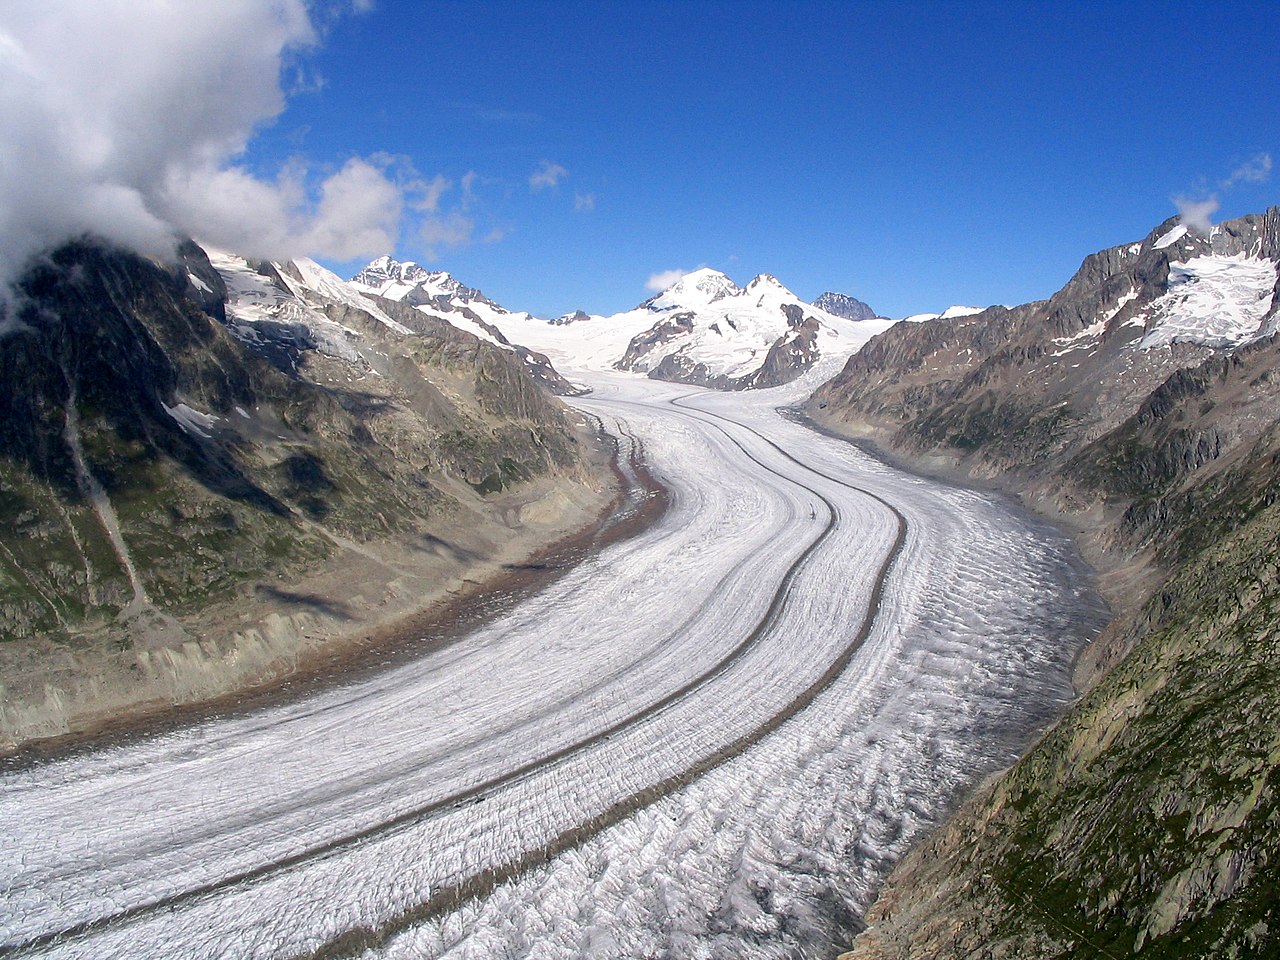 Frozen river of a the Aletsch Glacier curves in the forground. The peaks of Jungfrau, Monch and Trogberg are in the background against a blue sky.